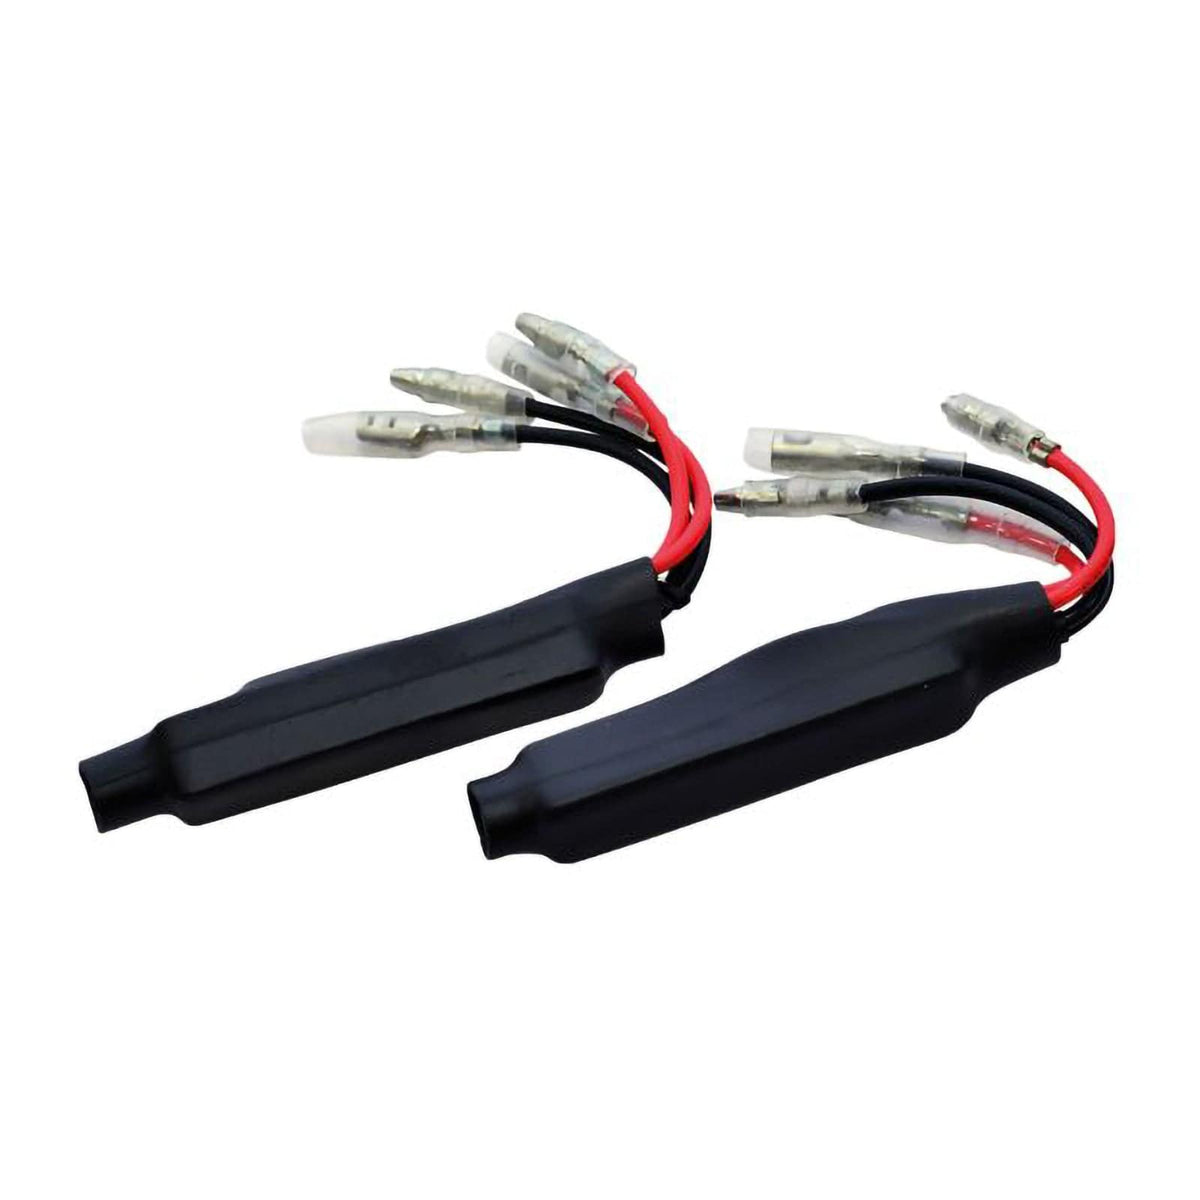 Oxford Products Indicator Accessories Turn Signal Load Resistors To Replace Original 21 Watt Signals (10 Ohm, 18W), Pair